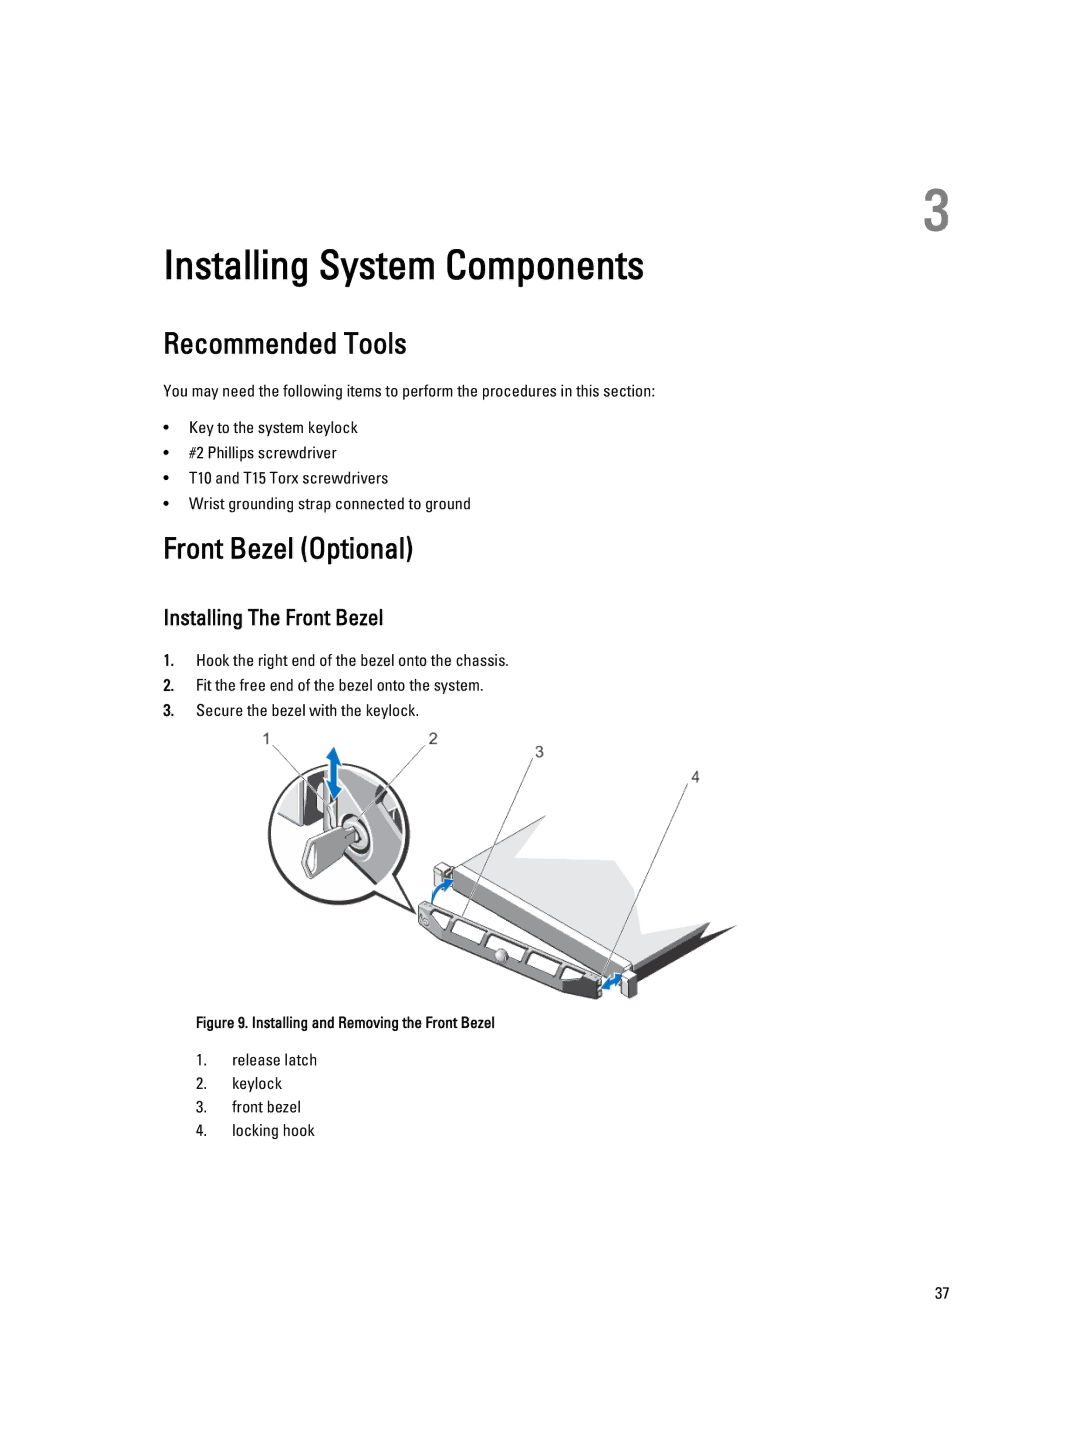 Dell R420, E18S001 owner manual Recommended Tools, Front Bezel Optional, Installing The Front Bezel 